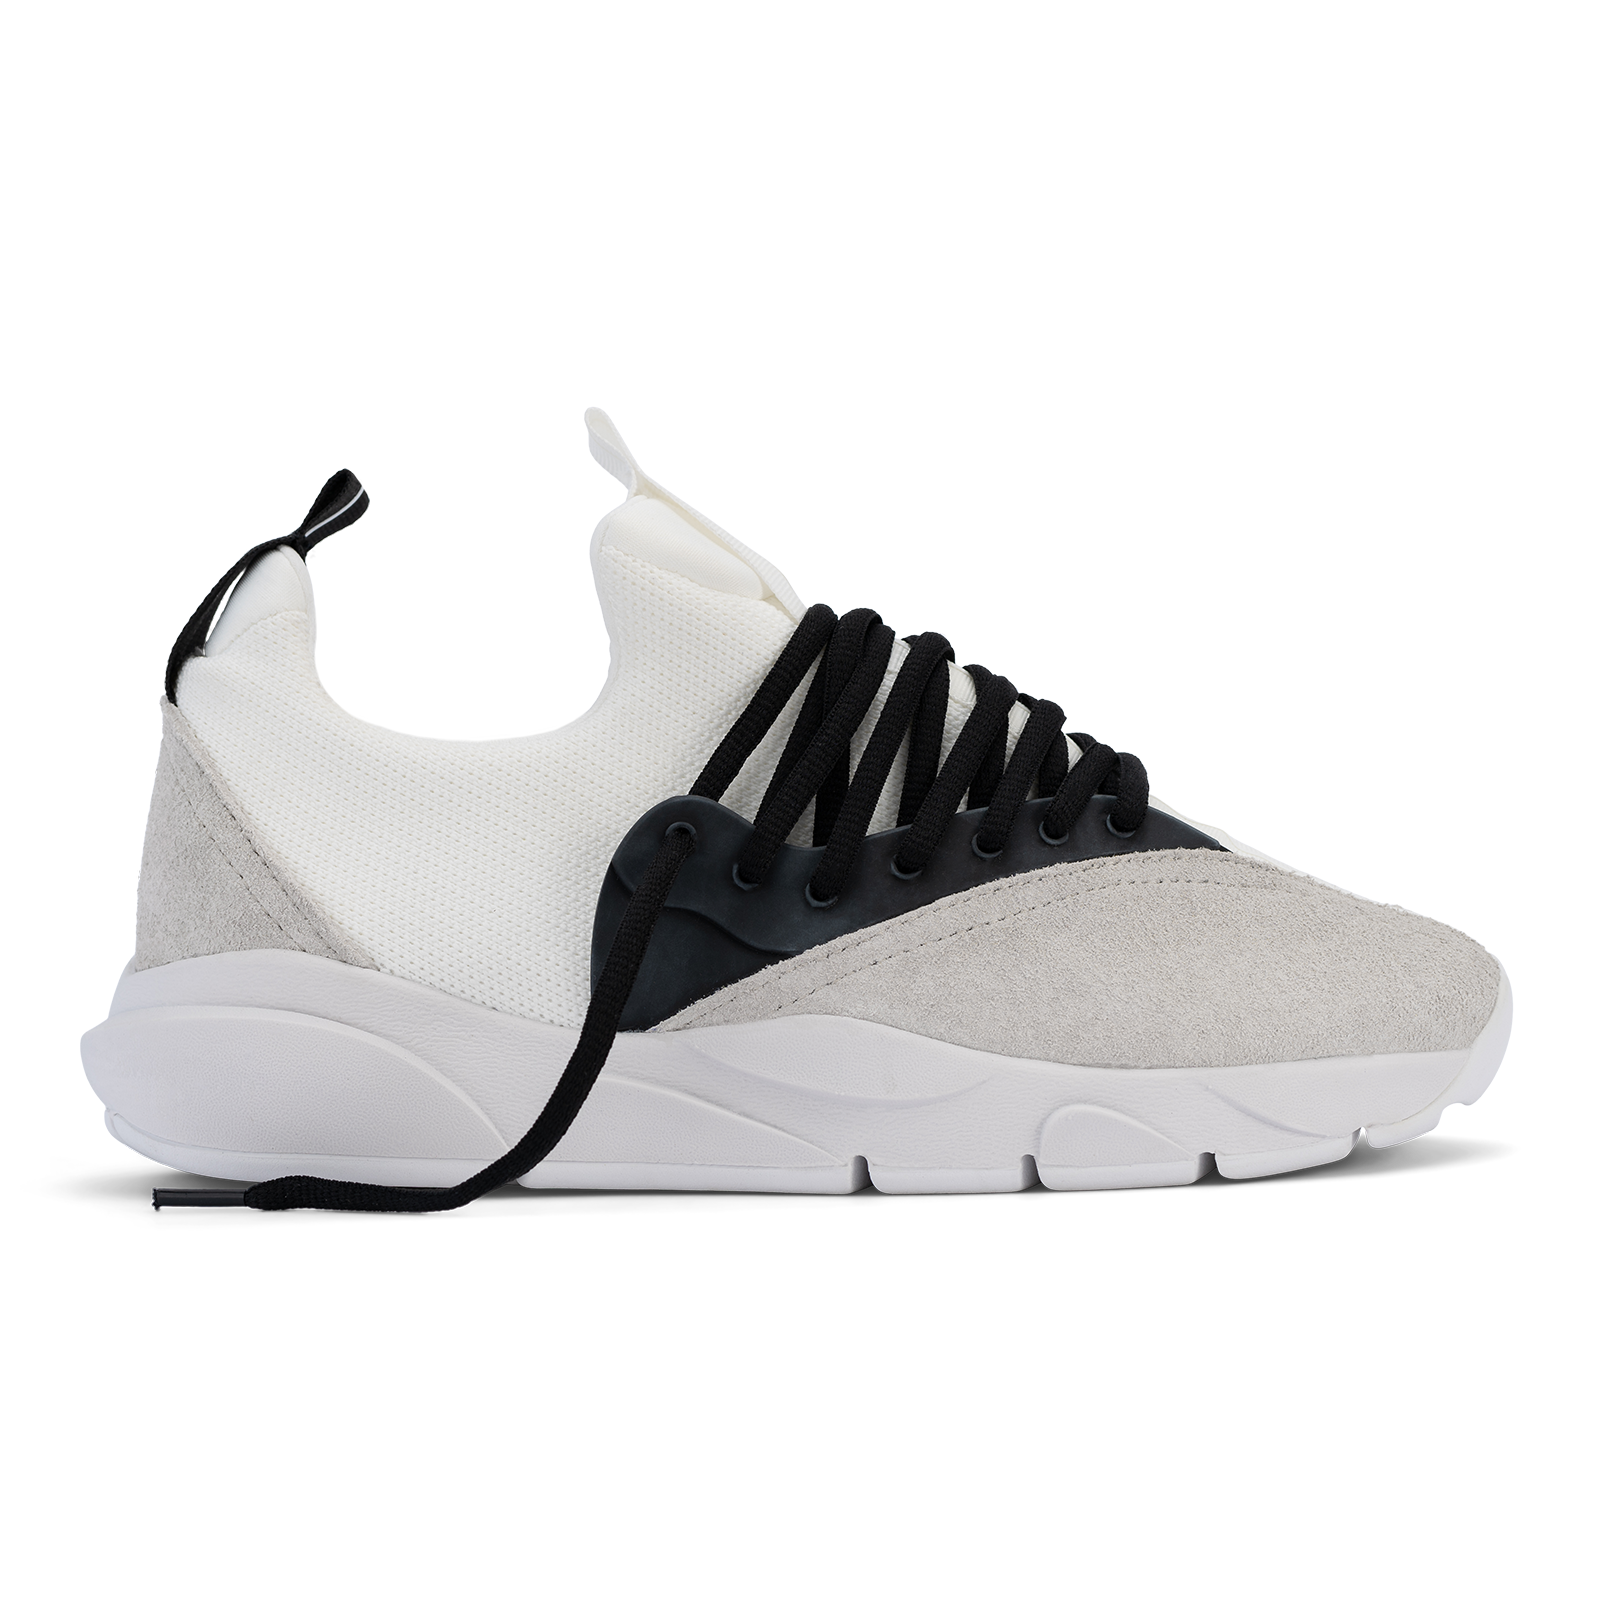 Profile view, Cloudstryk Fairbanks is a runner with White suede overlays white stretch mesh underlays, Black heel pull molded lace holder, white eva midsol and white rubber outsole.